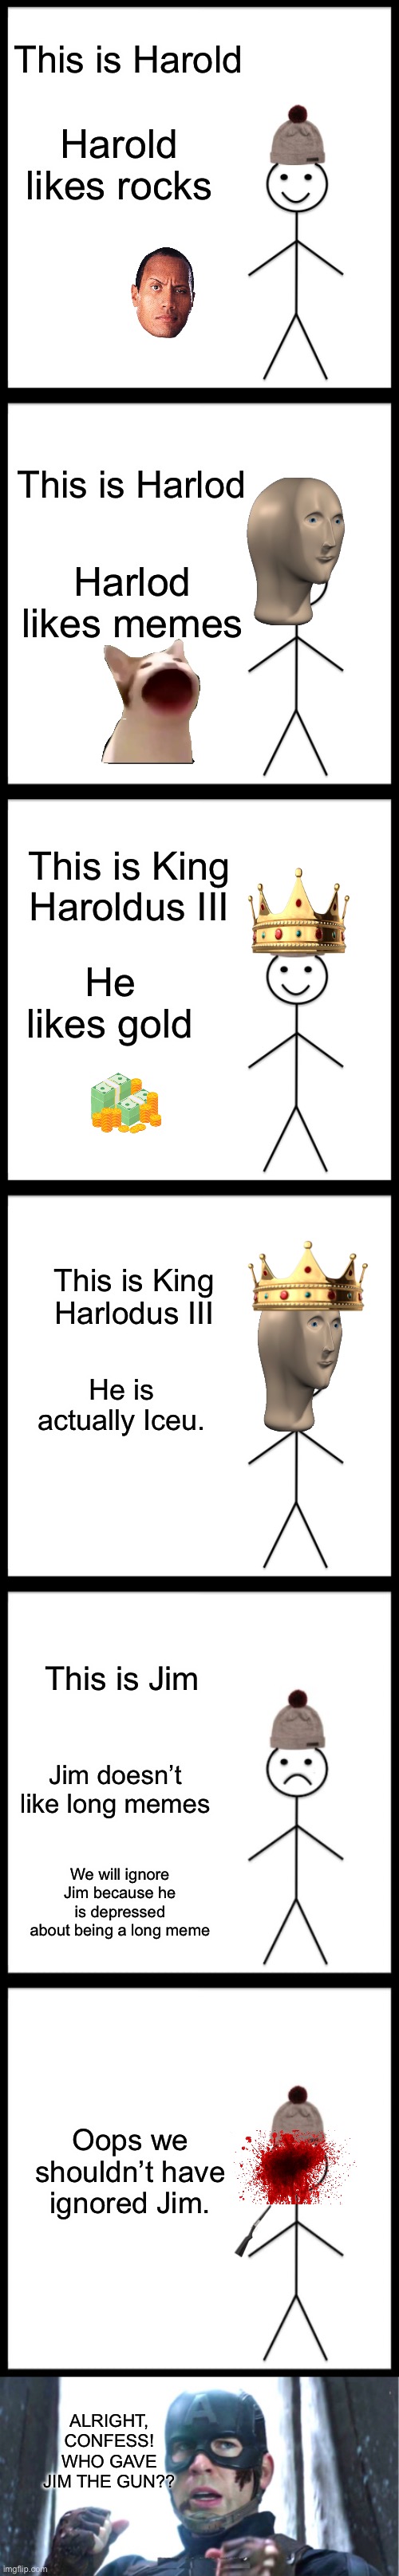 This is Harold; Harold likes rocks; This is Harlod; Harlod likes memes; This is King Haroldus III; He likes gold; This is King Harlodus III; He is actually Iceu. This is Jim; Jim doesn’t like long memes; We will ignore Jim because he is depressed about being a long meme; Oops we shouldn’t have ignored Jim. ALRIGHT, CONFESS! WHO GAVE JIM THE GUN?? | image tagged in memes,be like bill,don't be like bill,i can do this all day,guns | made w/ Imgflip meme maker